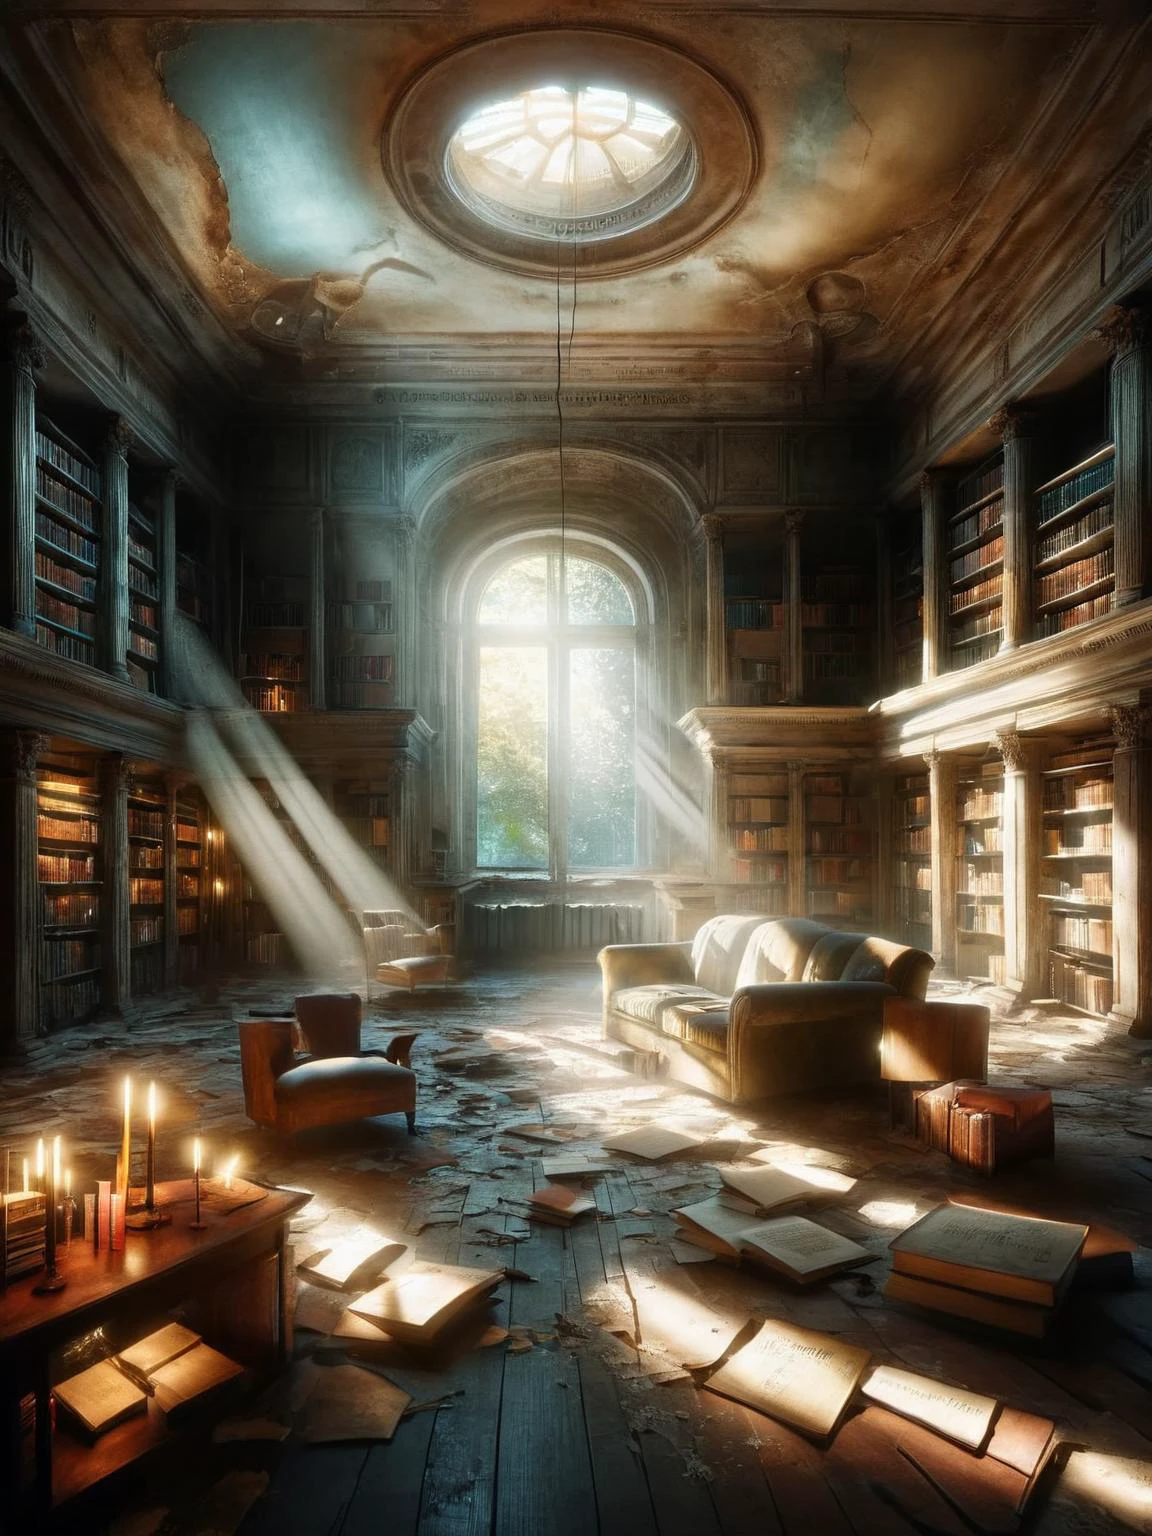 An ais-abandz library with shelves of forgotten stories, lit by a ray of light through the ceiling 4k, uhd,masterpiece ais-sinisterz